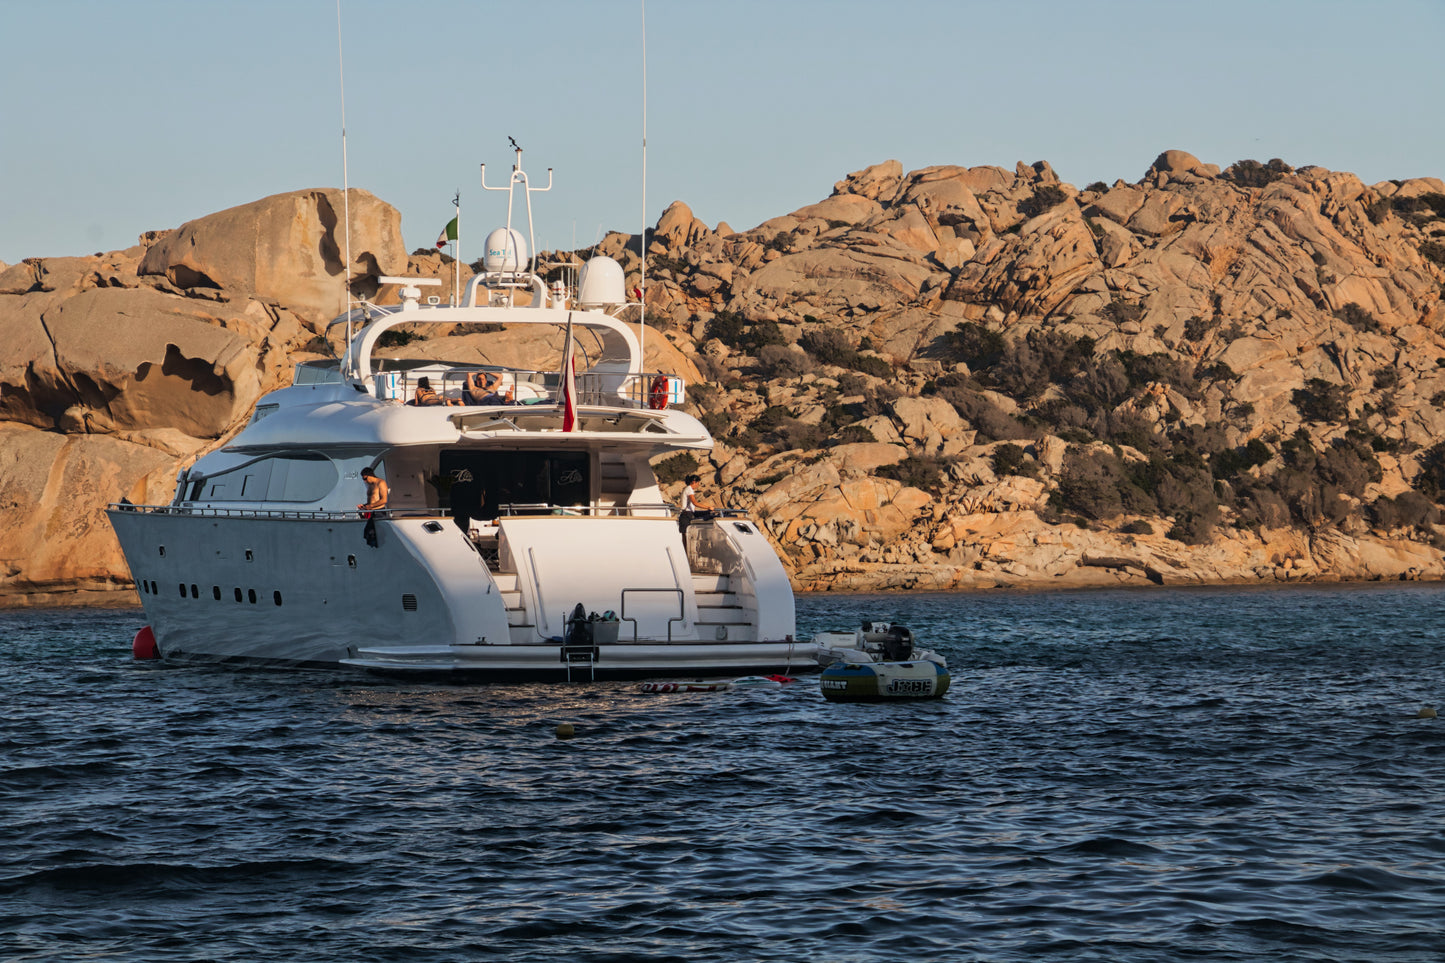 RENT A CHARTER YACHT | Dream Vacation on a Luxury Yacht